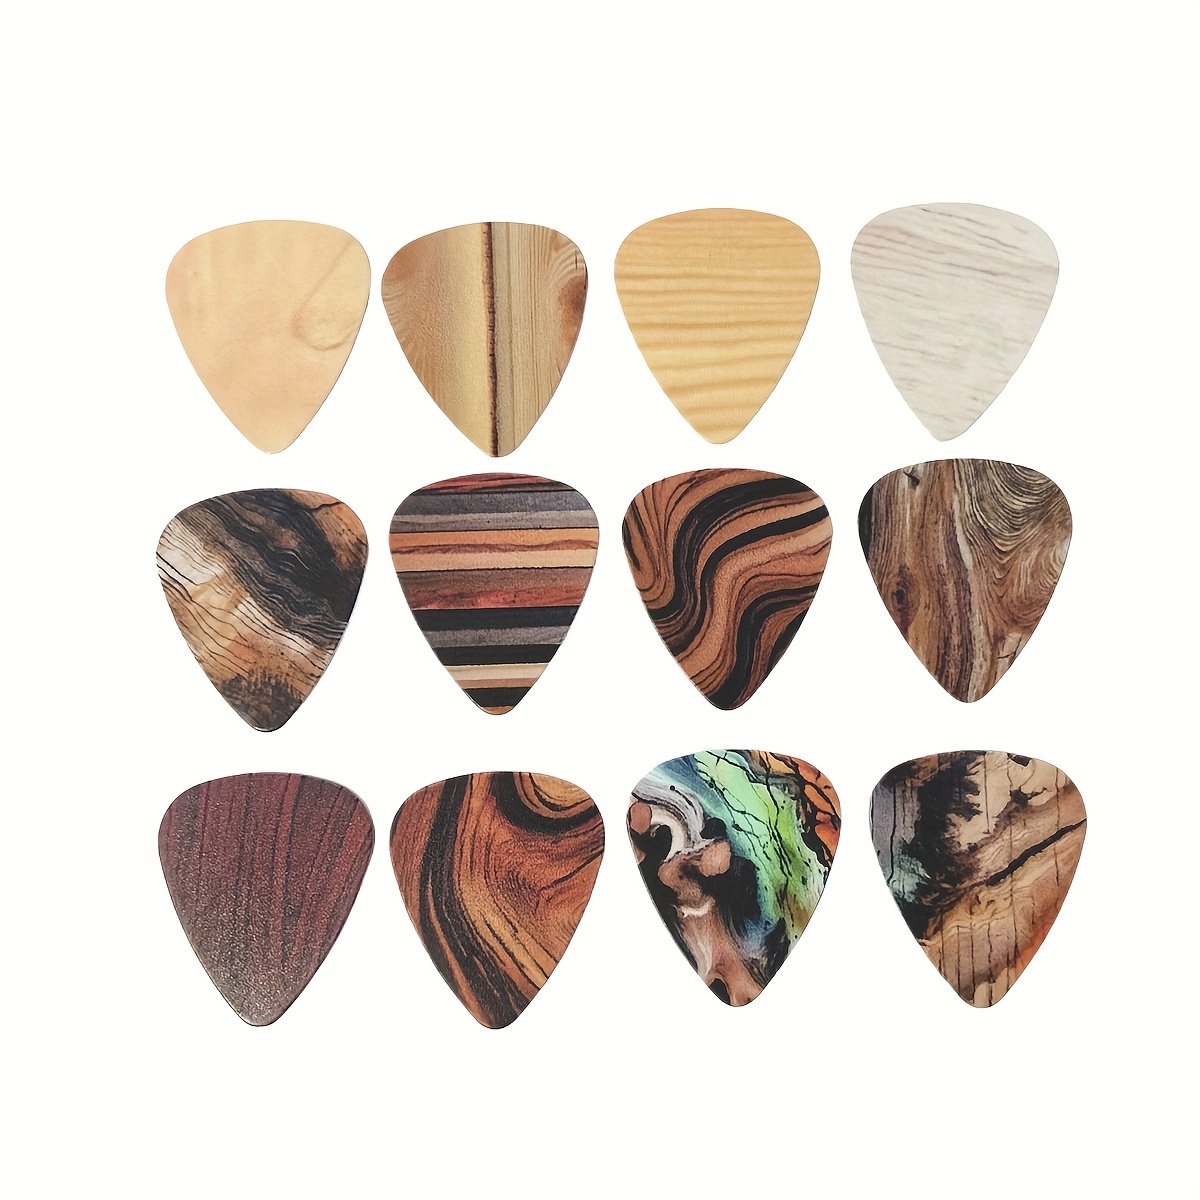 

Guitar Picks 12pcs/set - Double-sided Printed Wood Grain Designs For Bass, , Ukulele - Colorful Themed Instrument Accessories